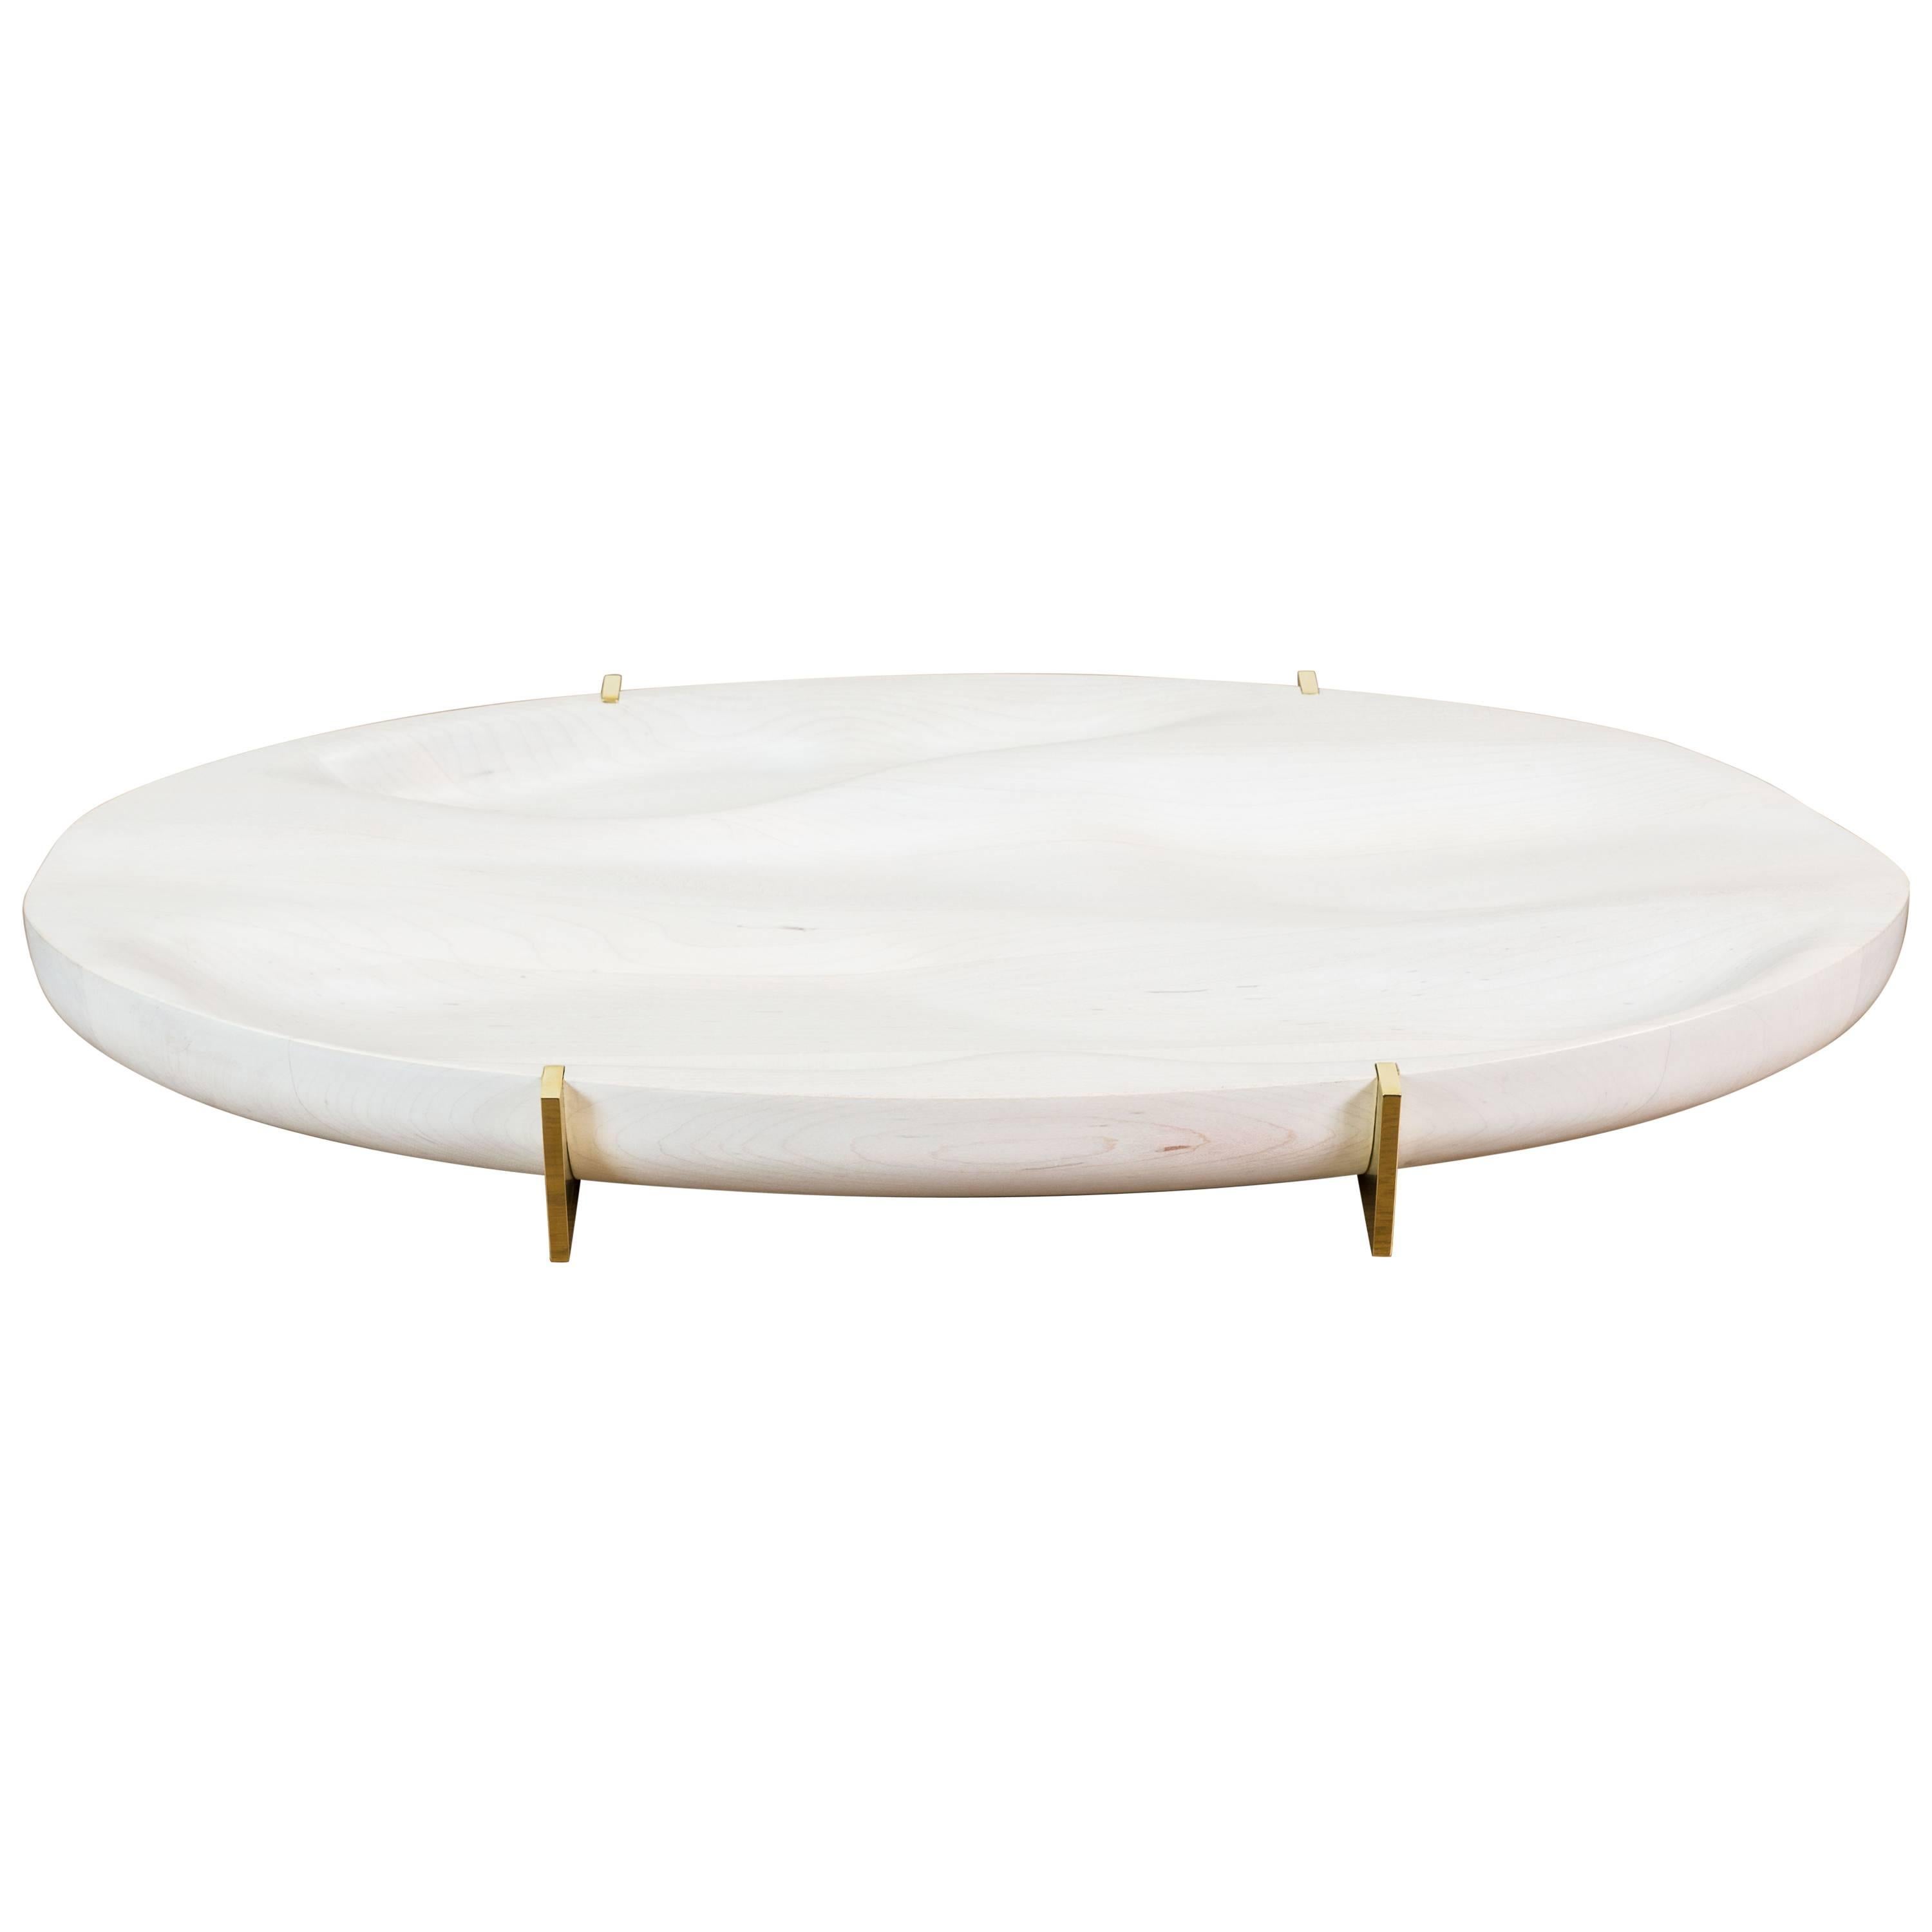 Bleached Maple and Brass Oval Tray by Vincent Pocsik for Lawson-Fenning